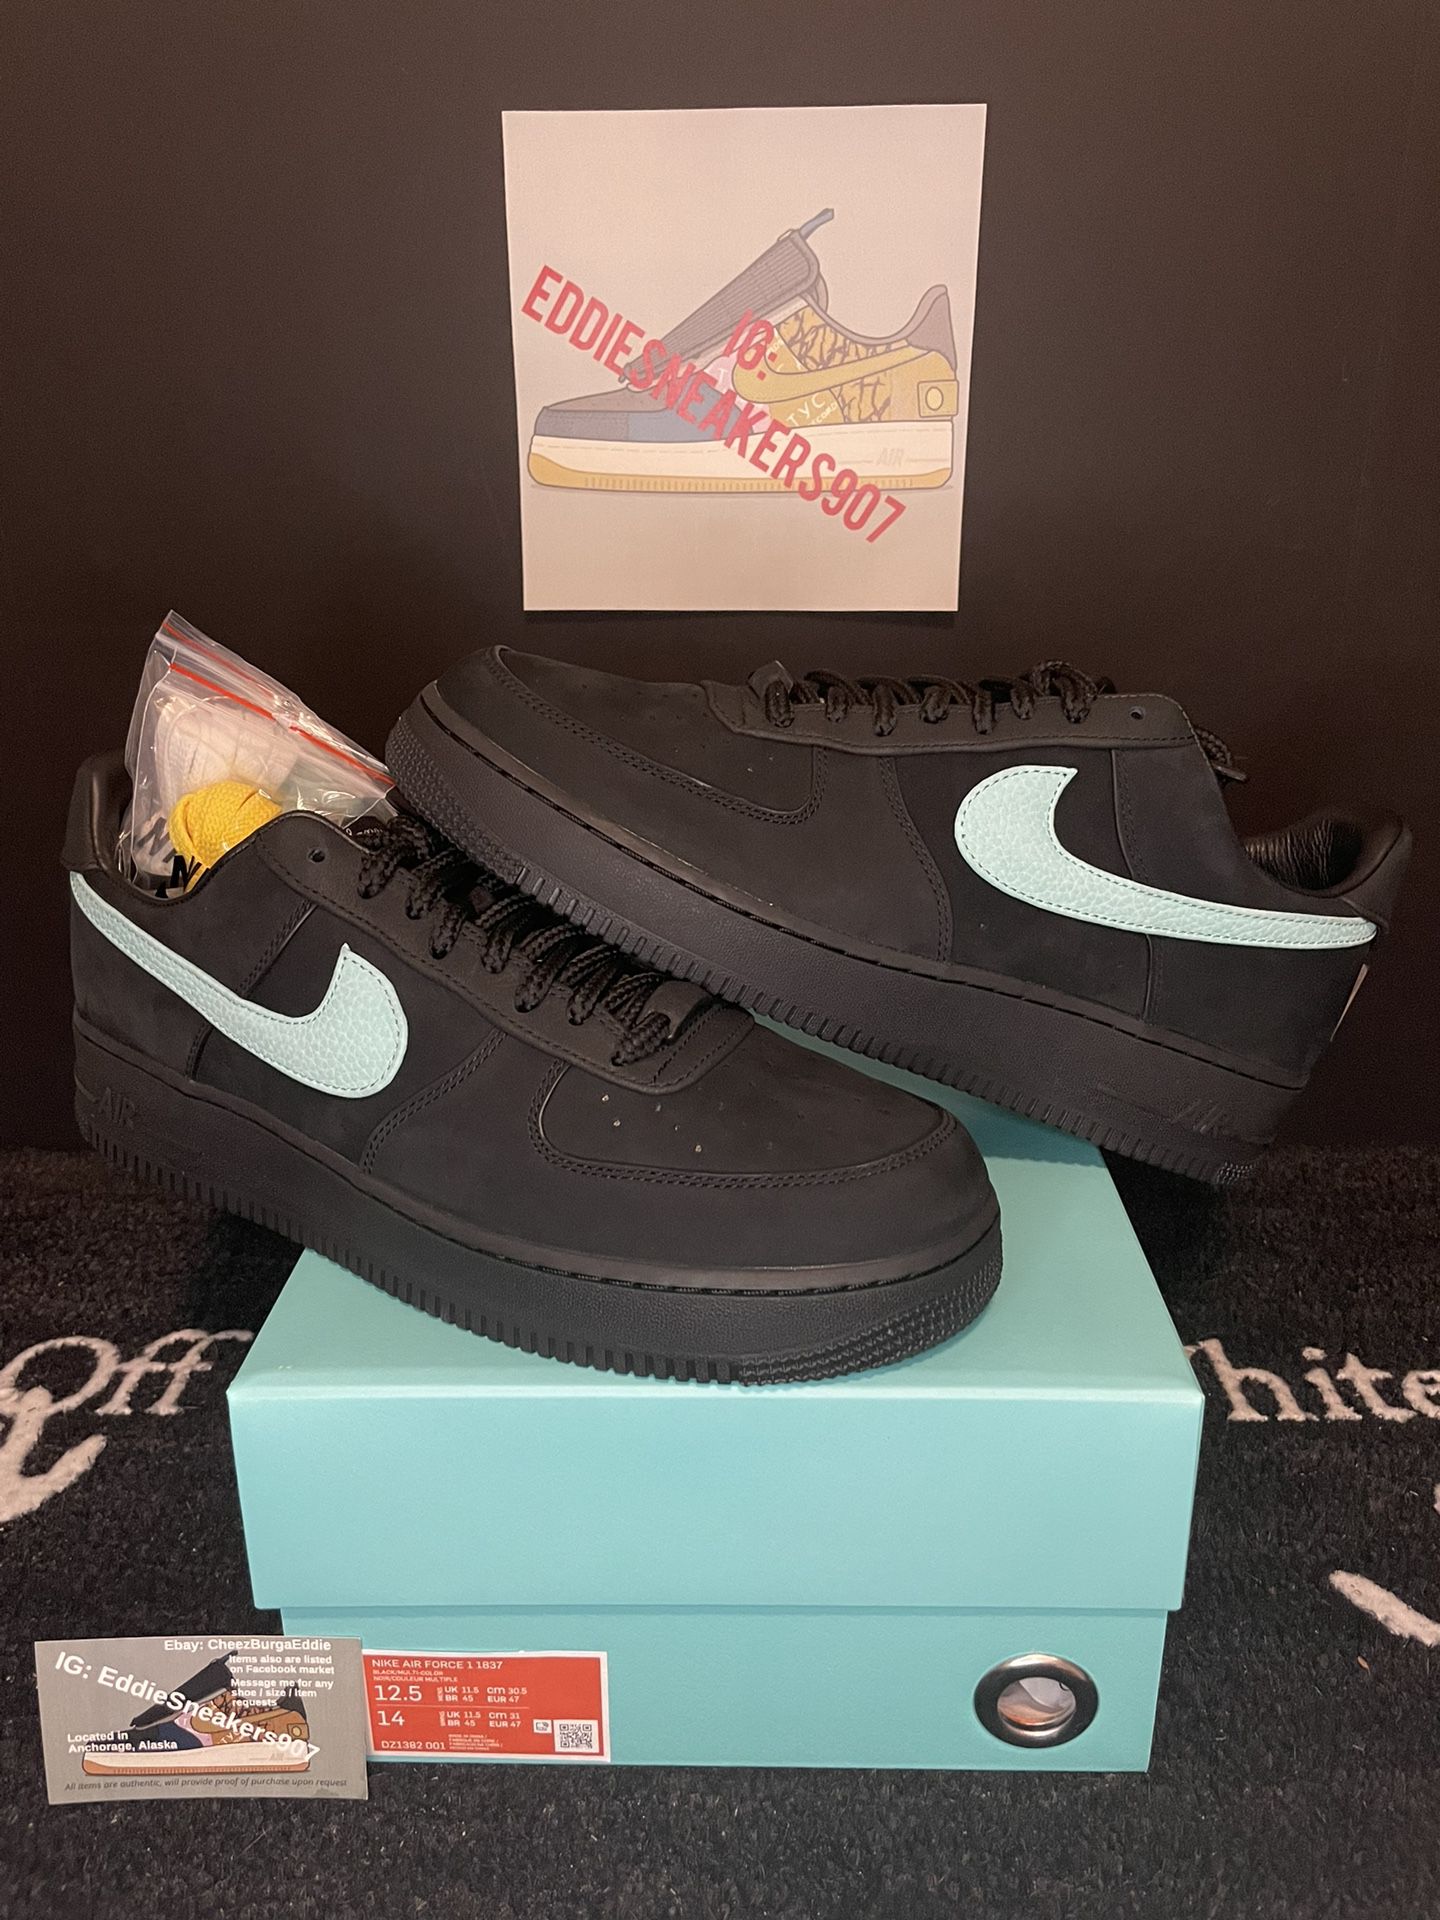 Nike Air Force 1 x Tiffany & Co 1837 Men’s Size 12.5